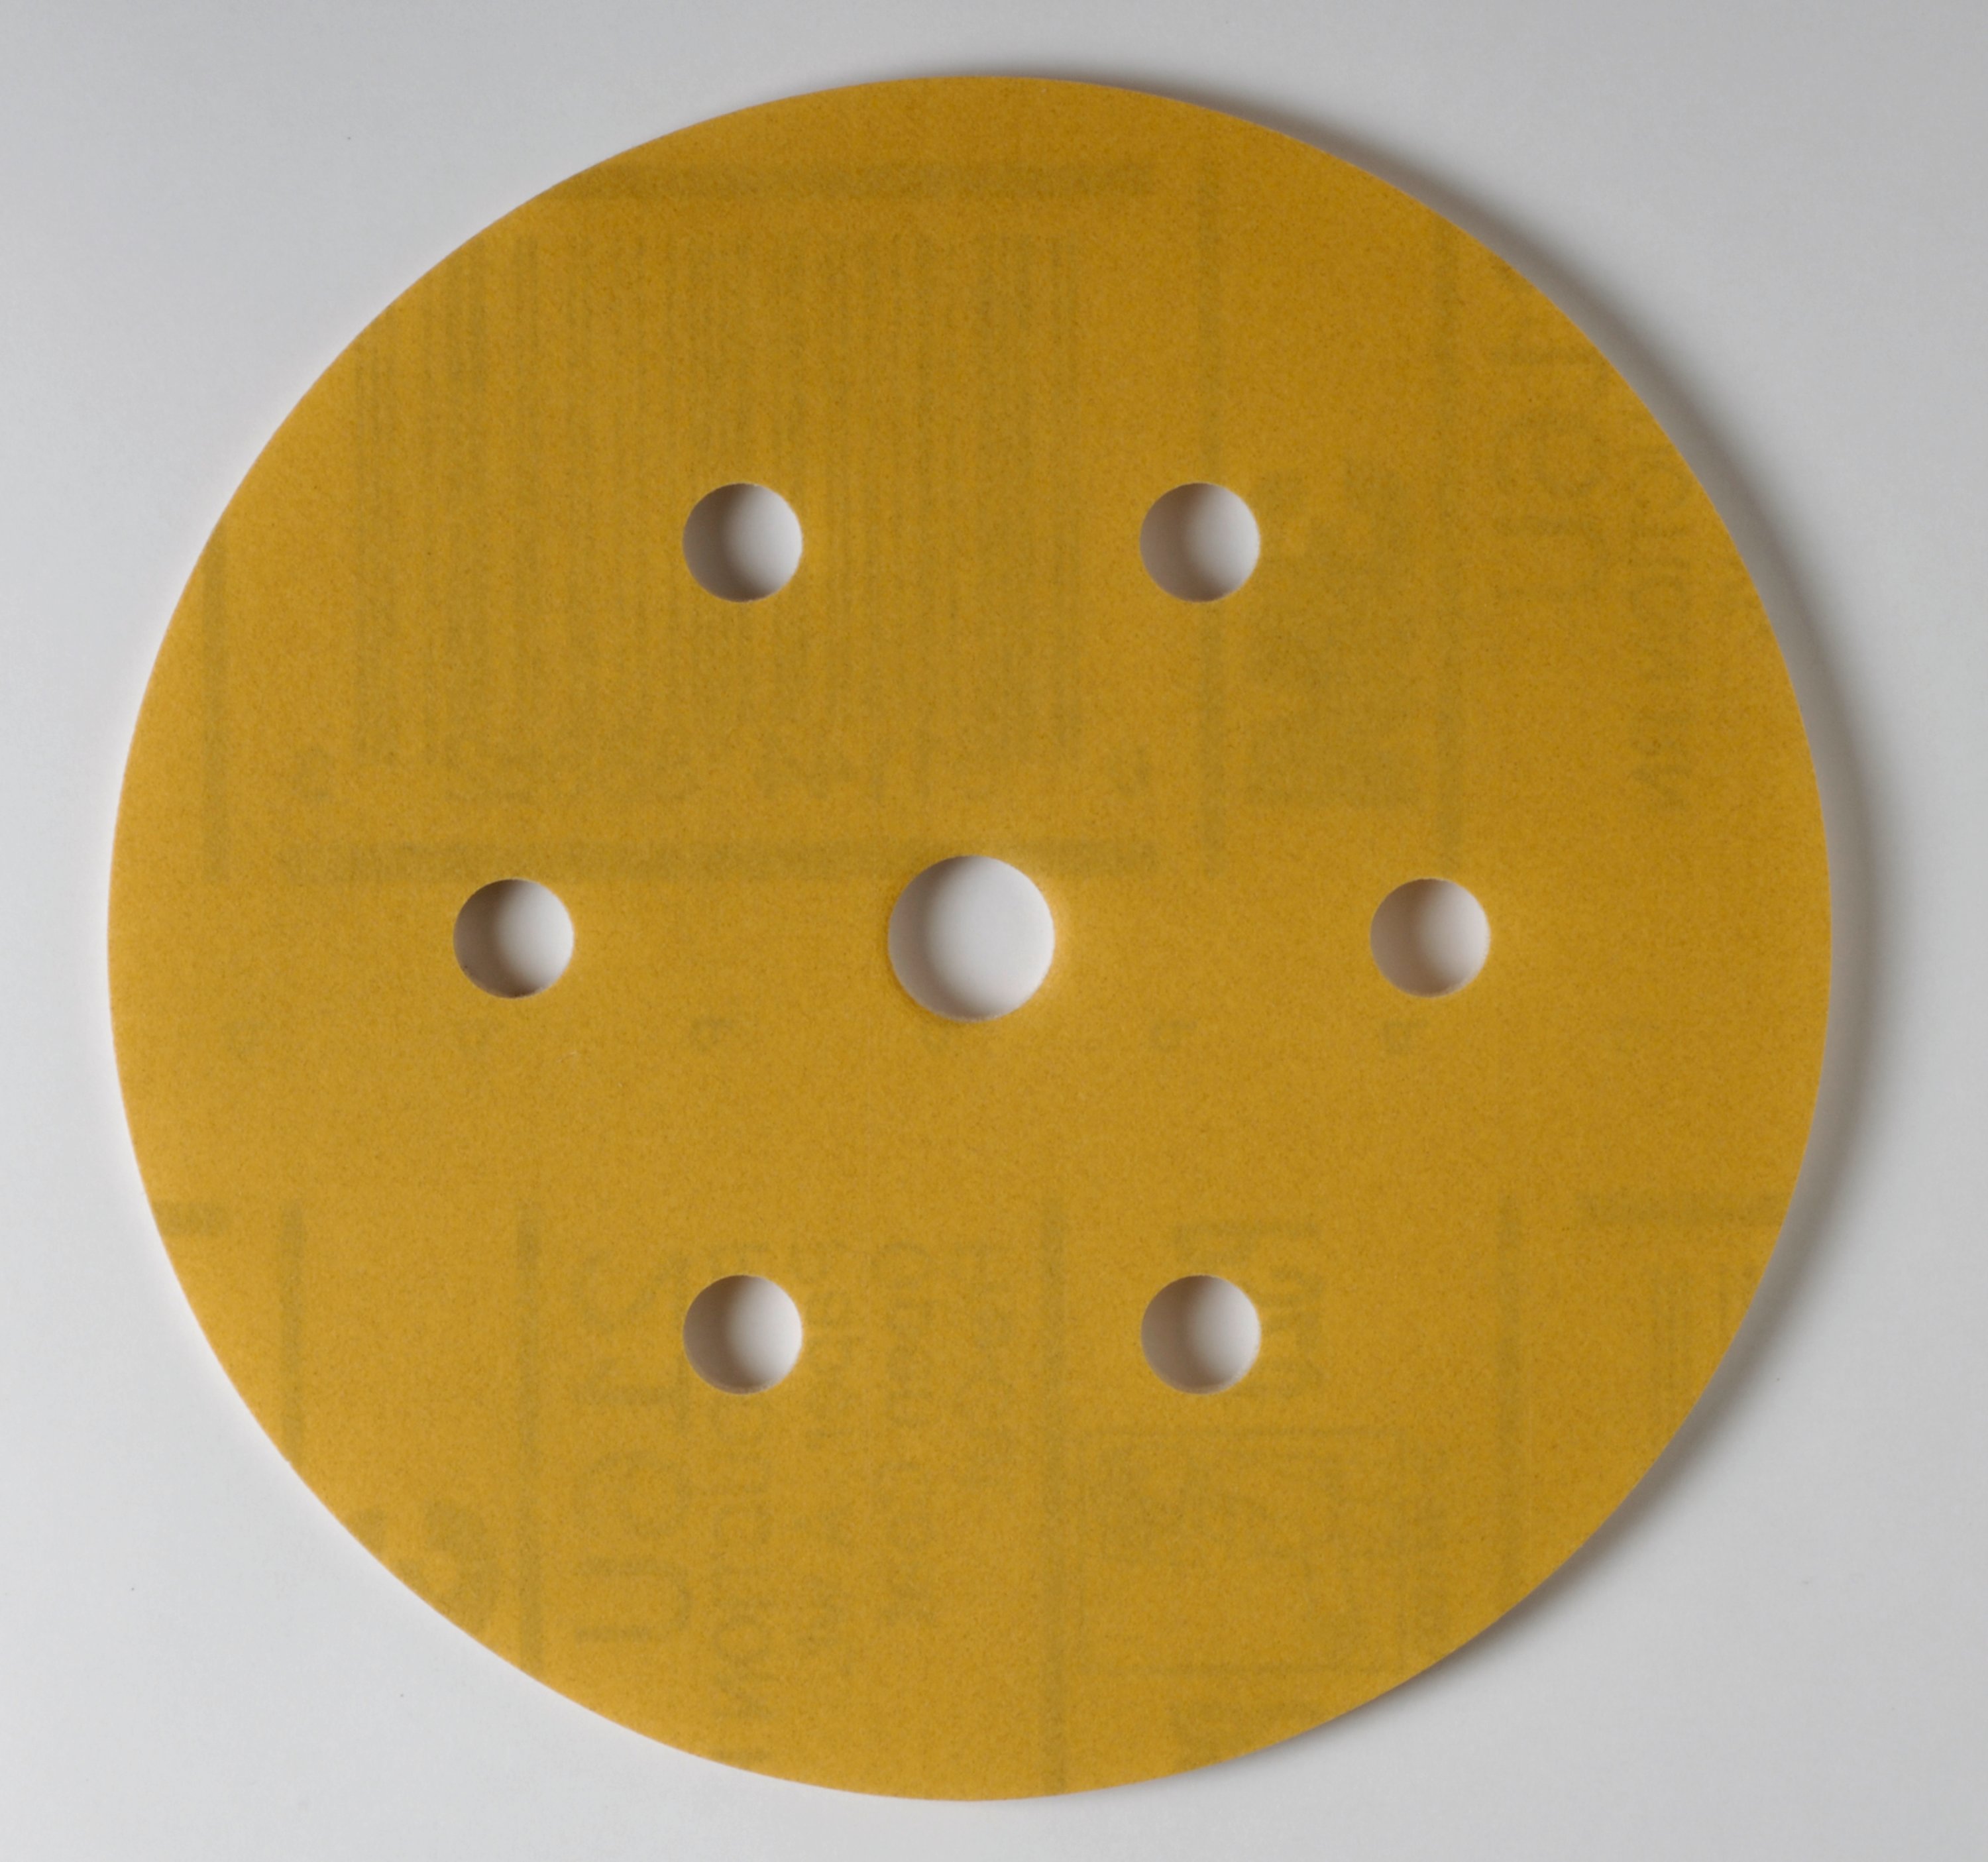 3M™ Stikit™ Gold Disc Roll 216U provides a sharp cut — more aggressive than a comparable closed coat abrasive of the same grade